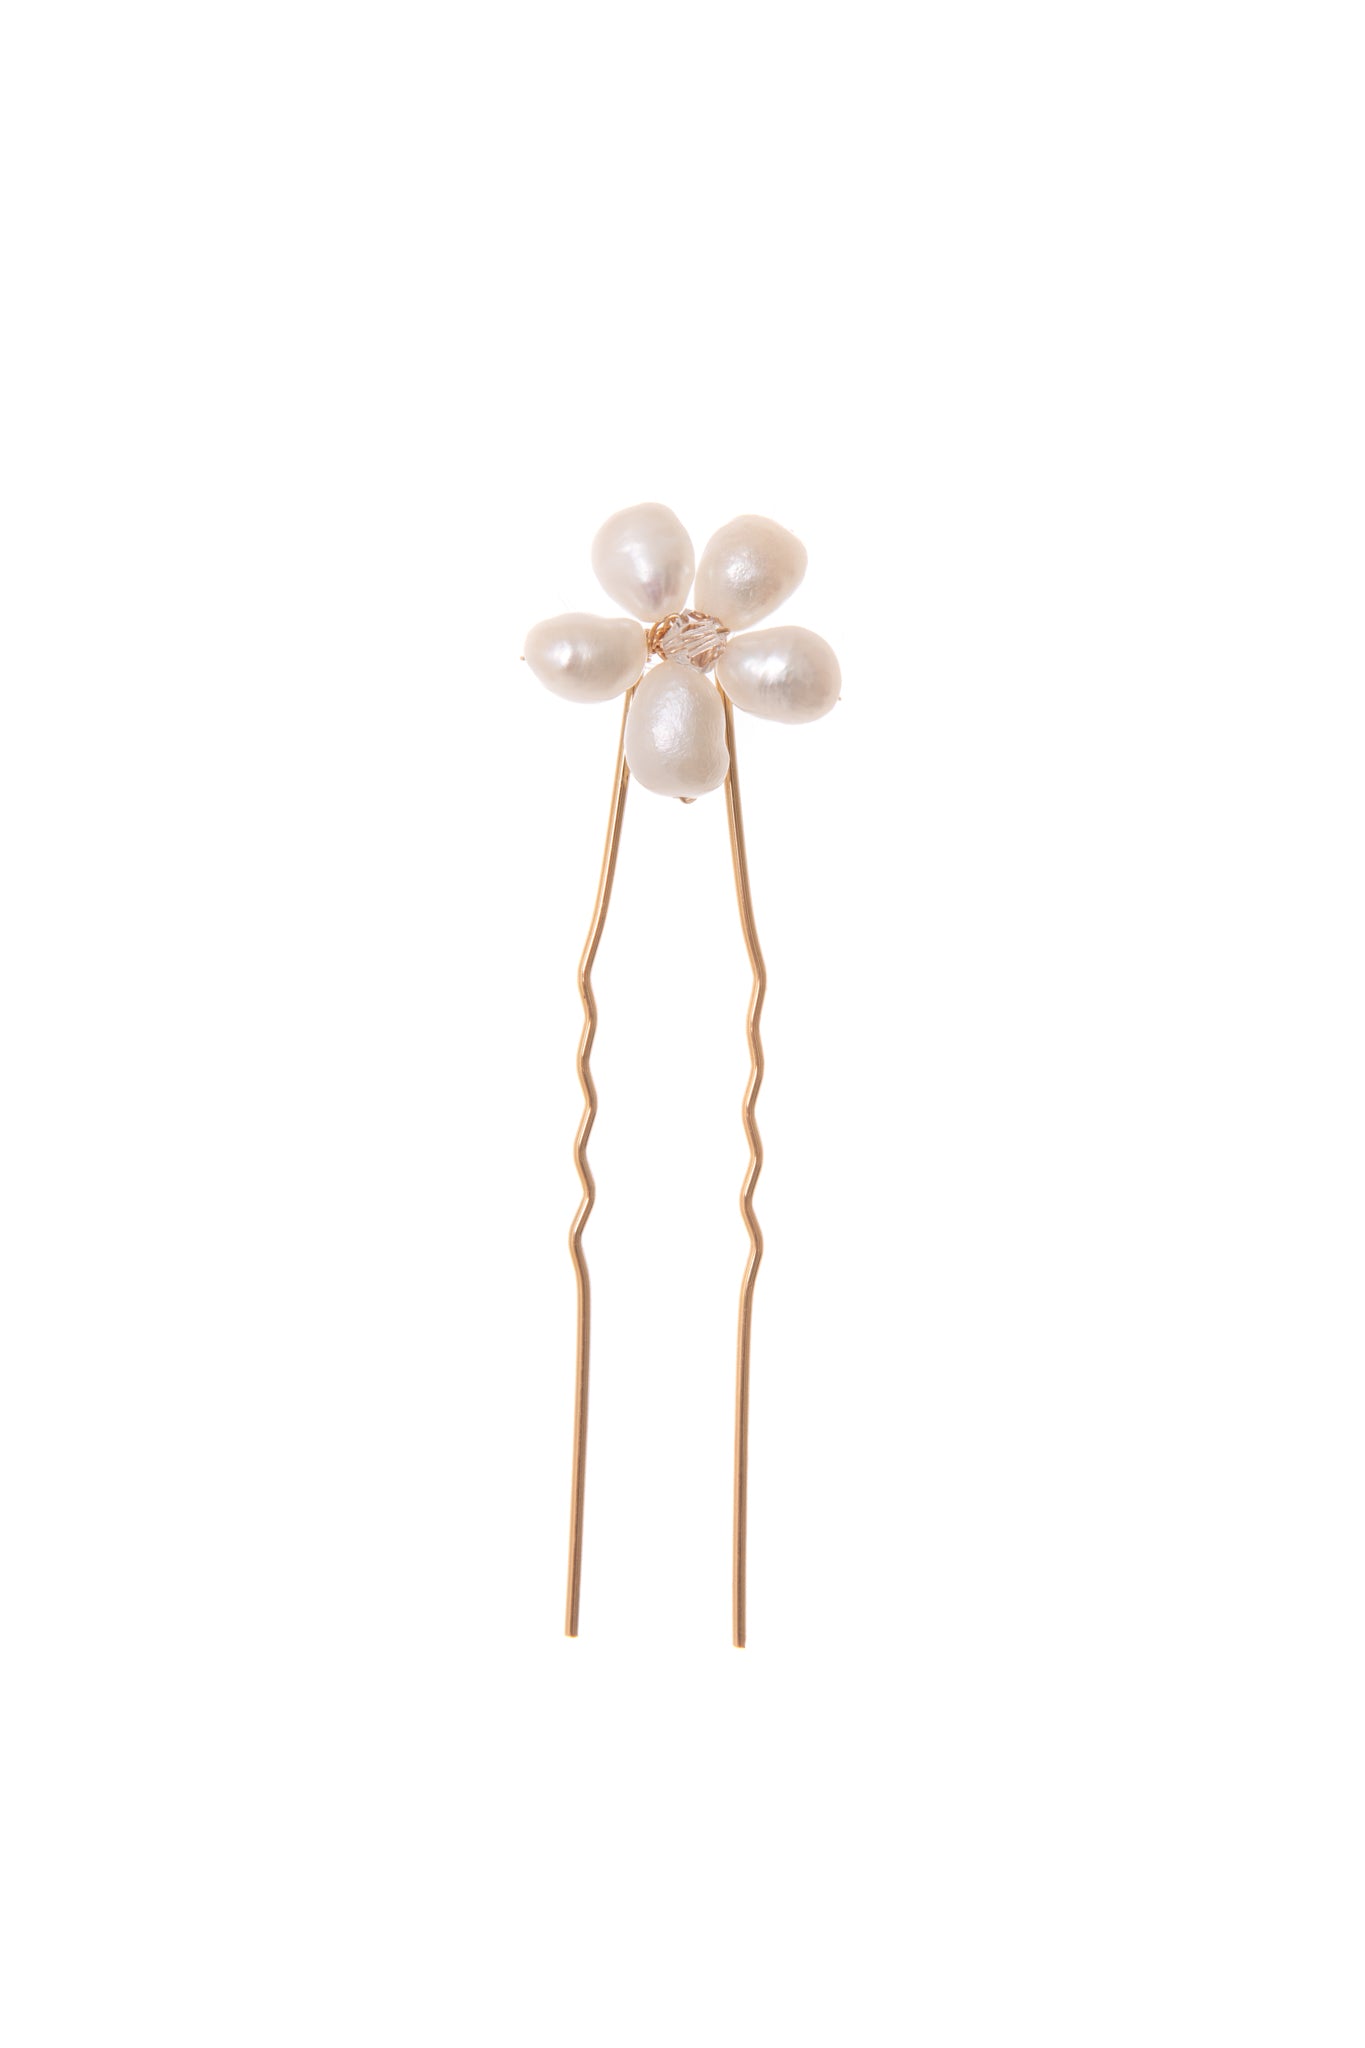 This Pearl hair pin petite is a stunning accessory featuring a delicate freshwater pearl flower. 